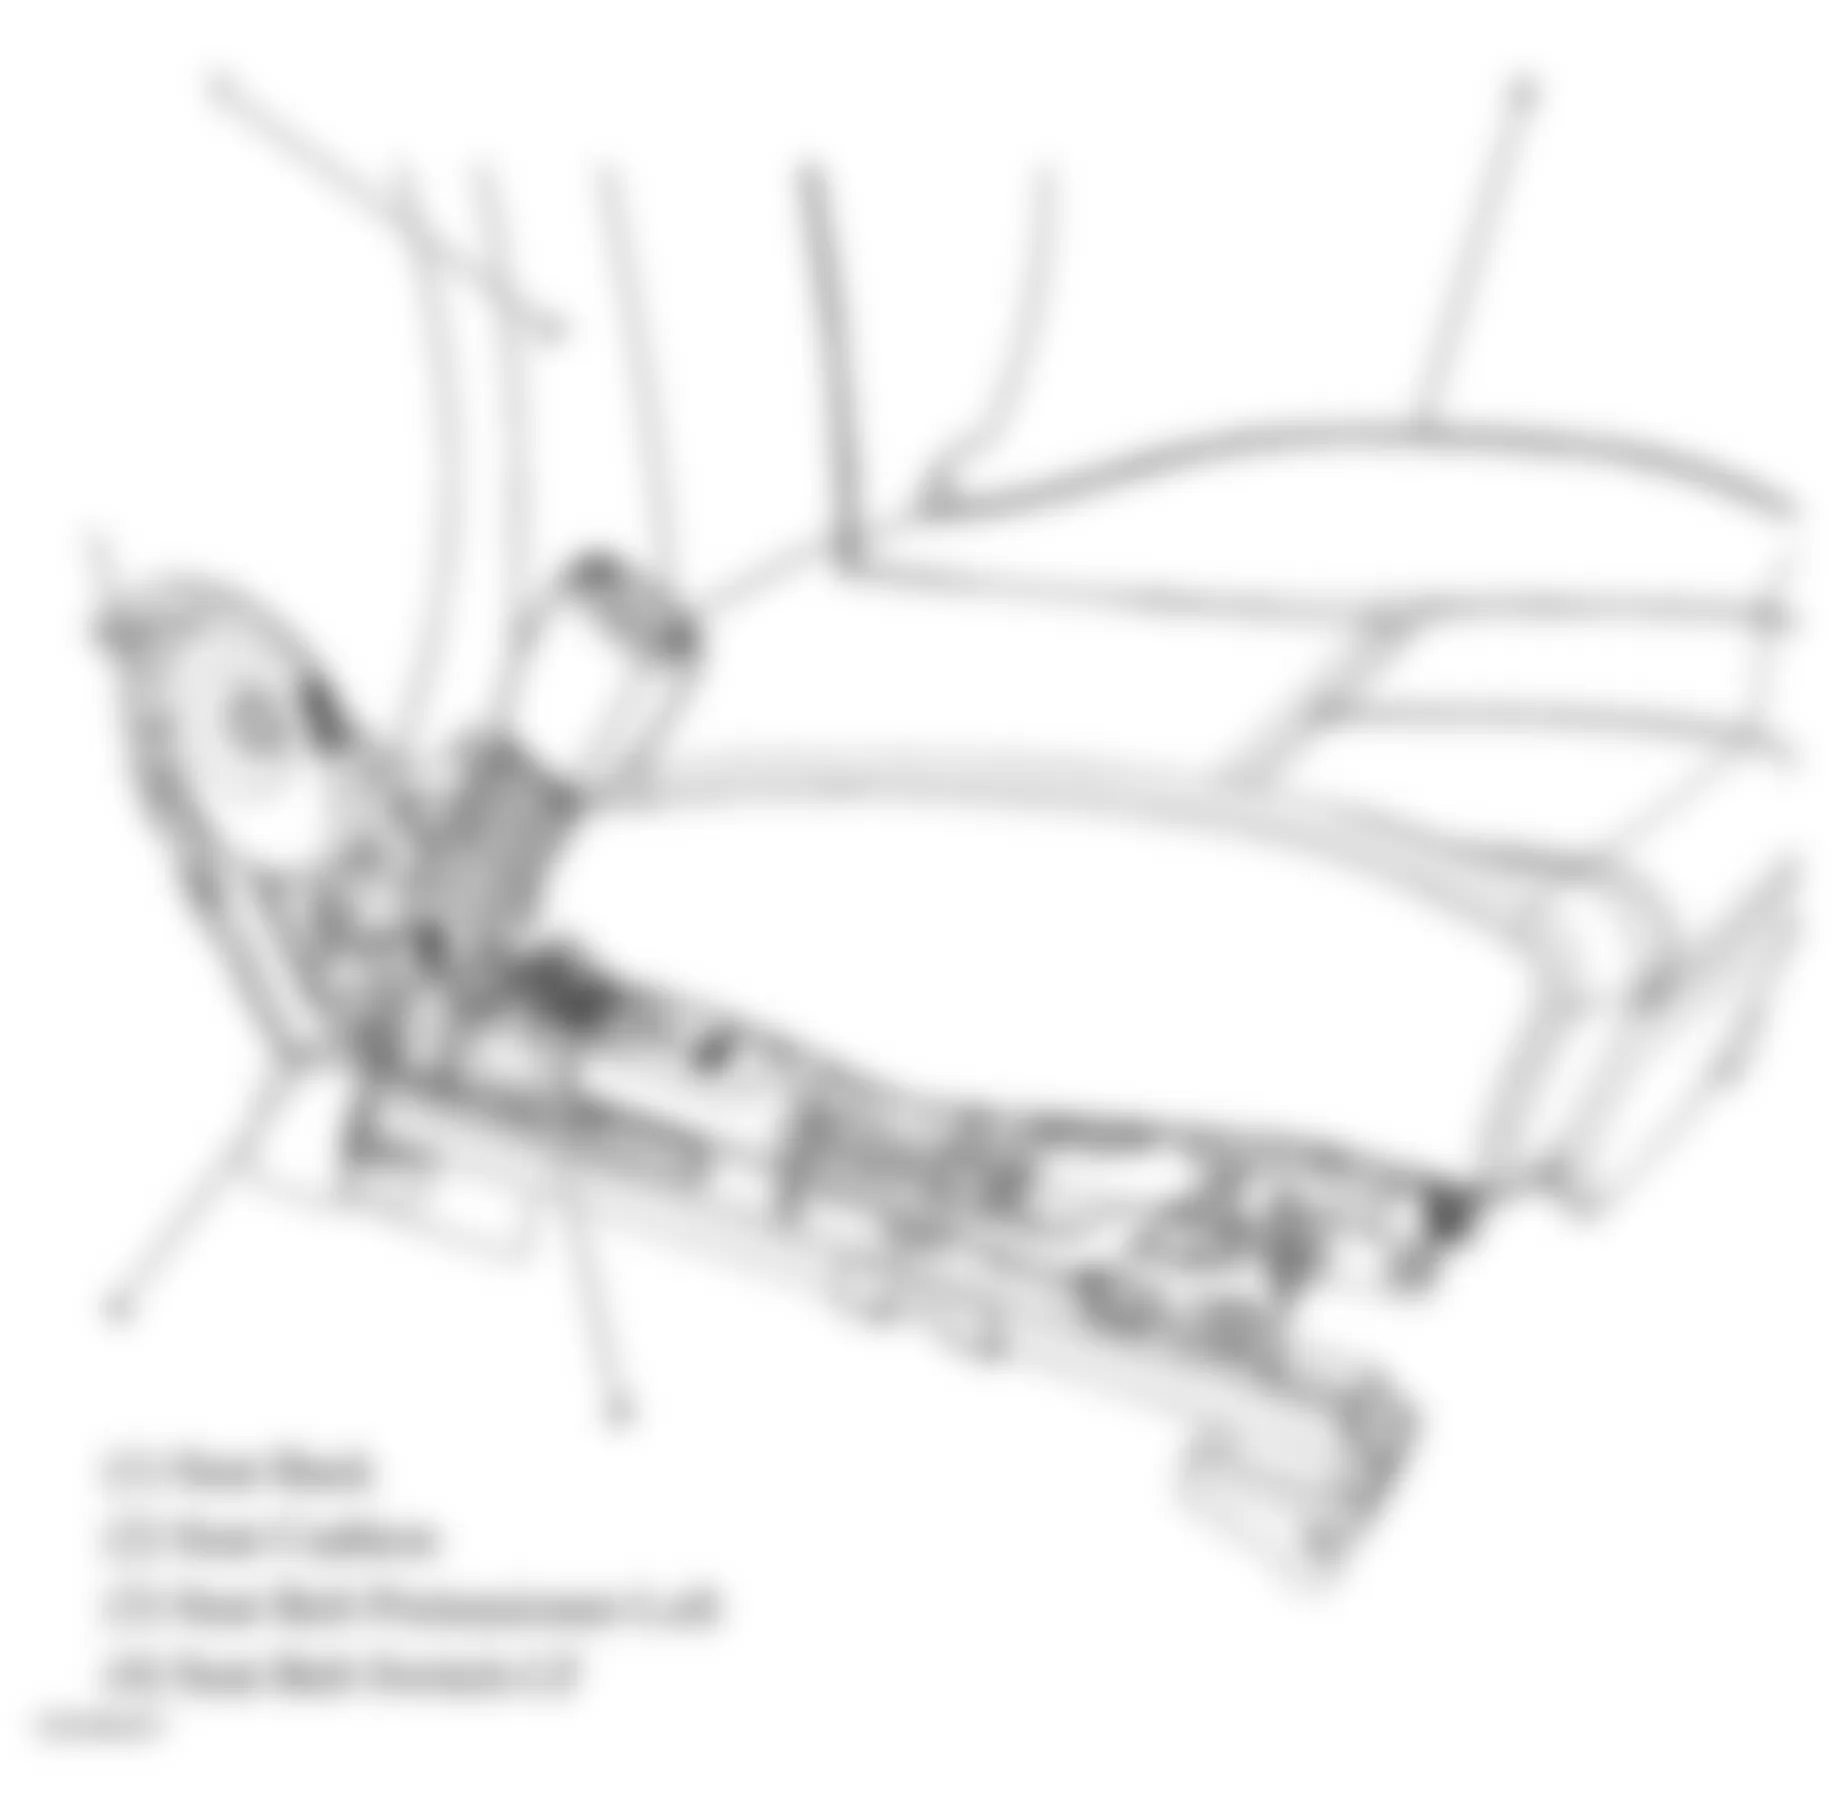 Buick Allure CXL 2005 - Component Locations -  Left Front Seat Assembly